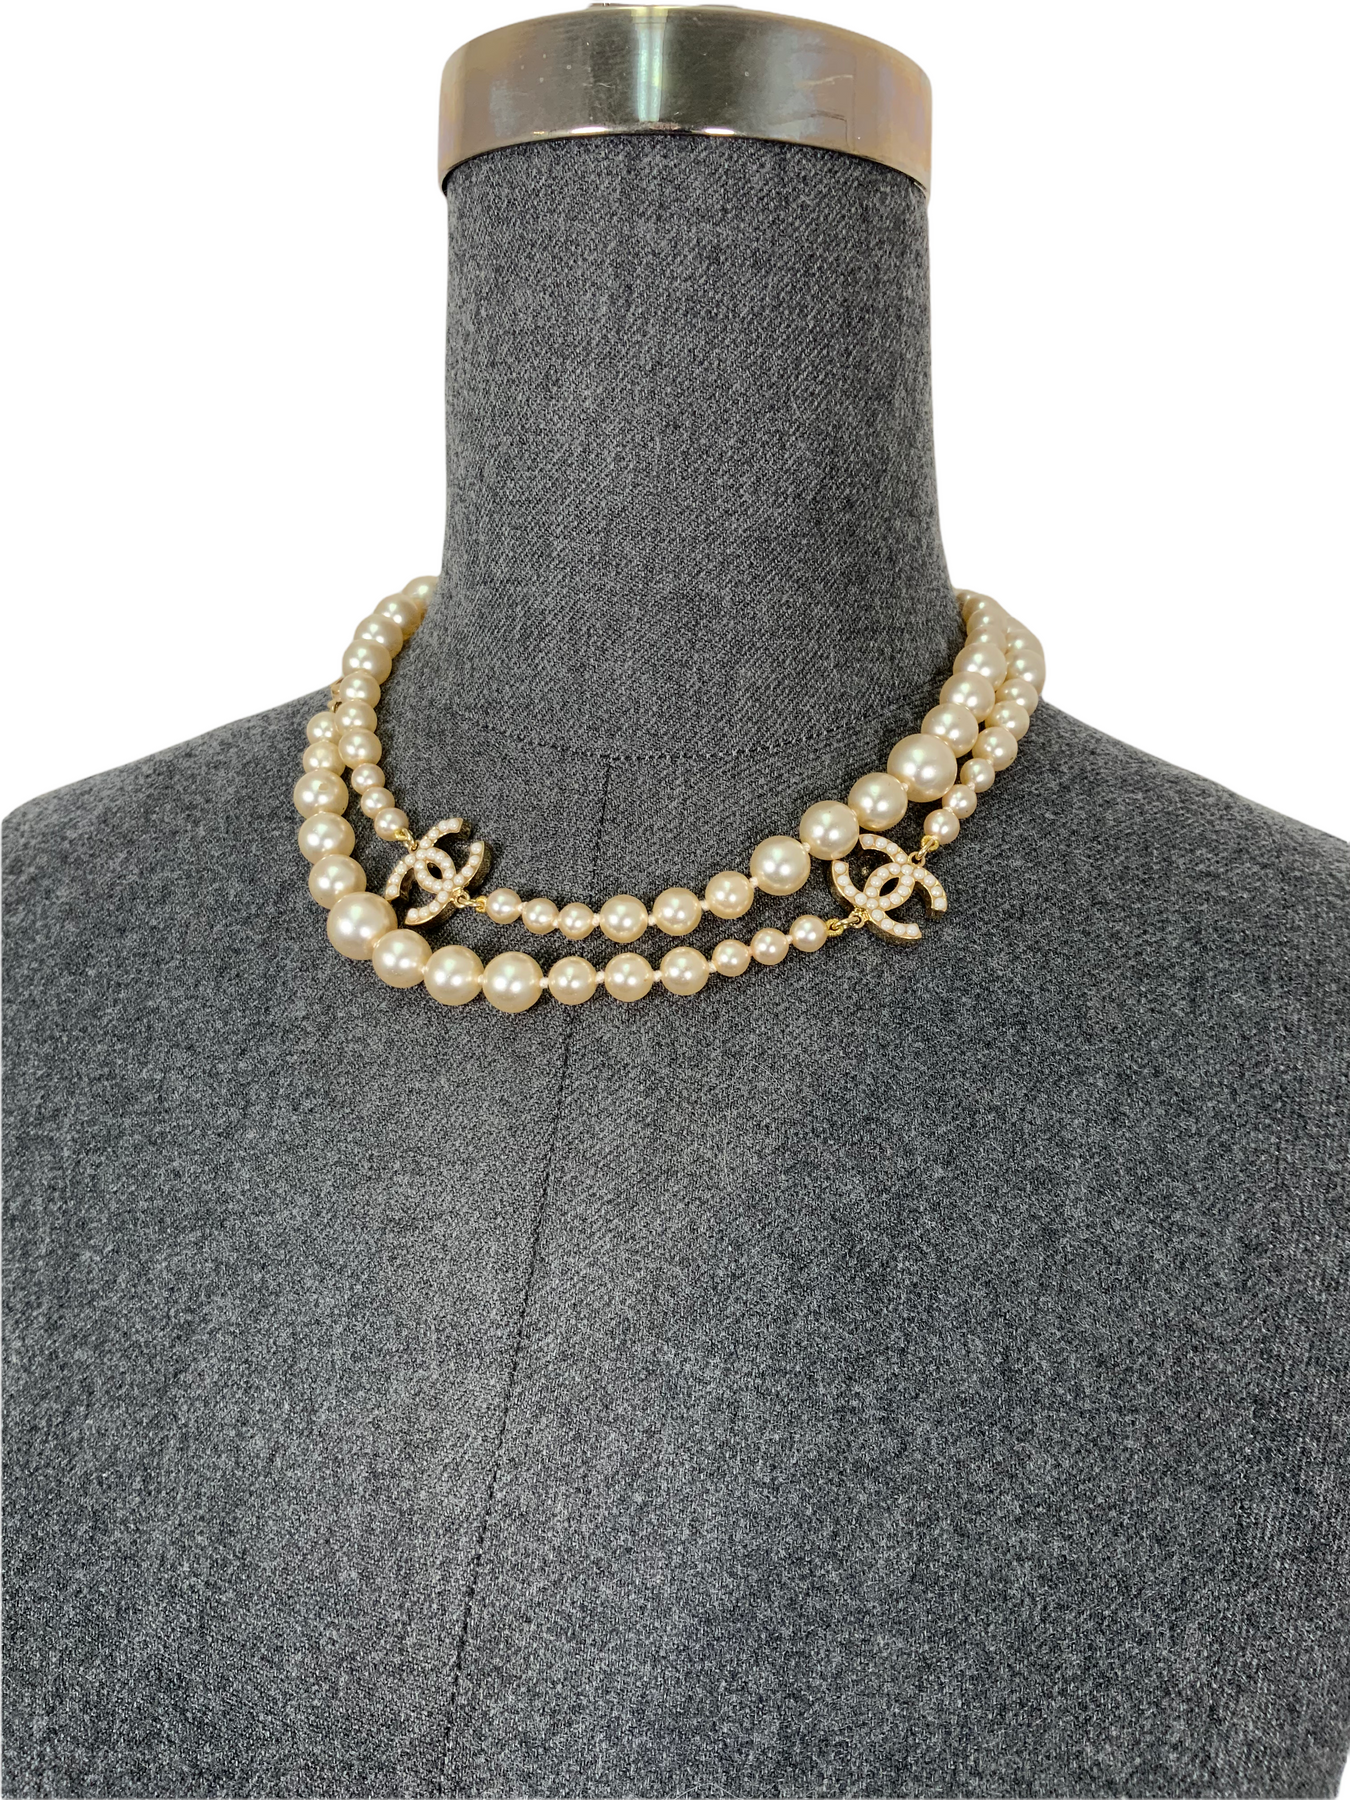 CHANEL CC Logo Timeless Classic Faux Pearl Necklace - Consigned Designs